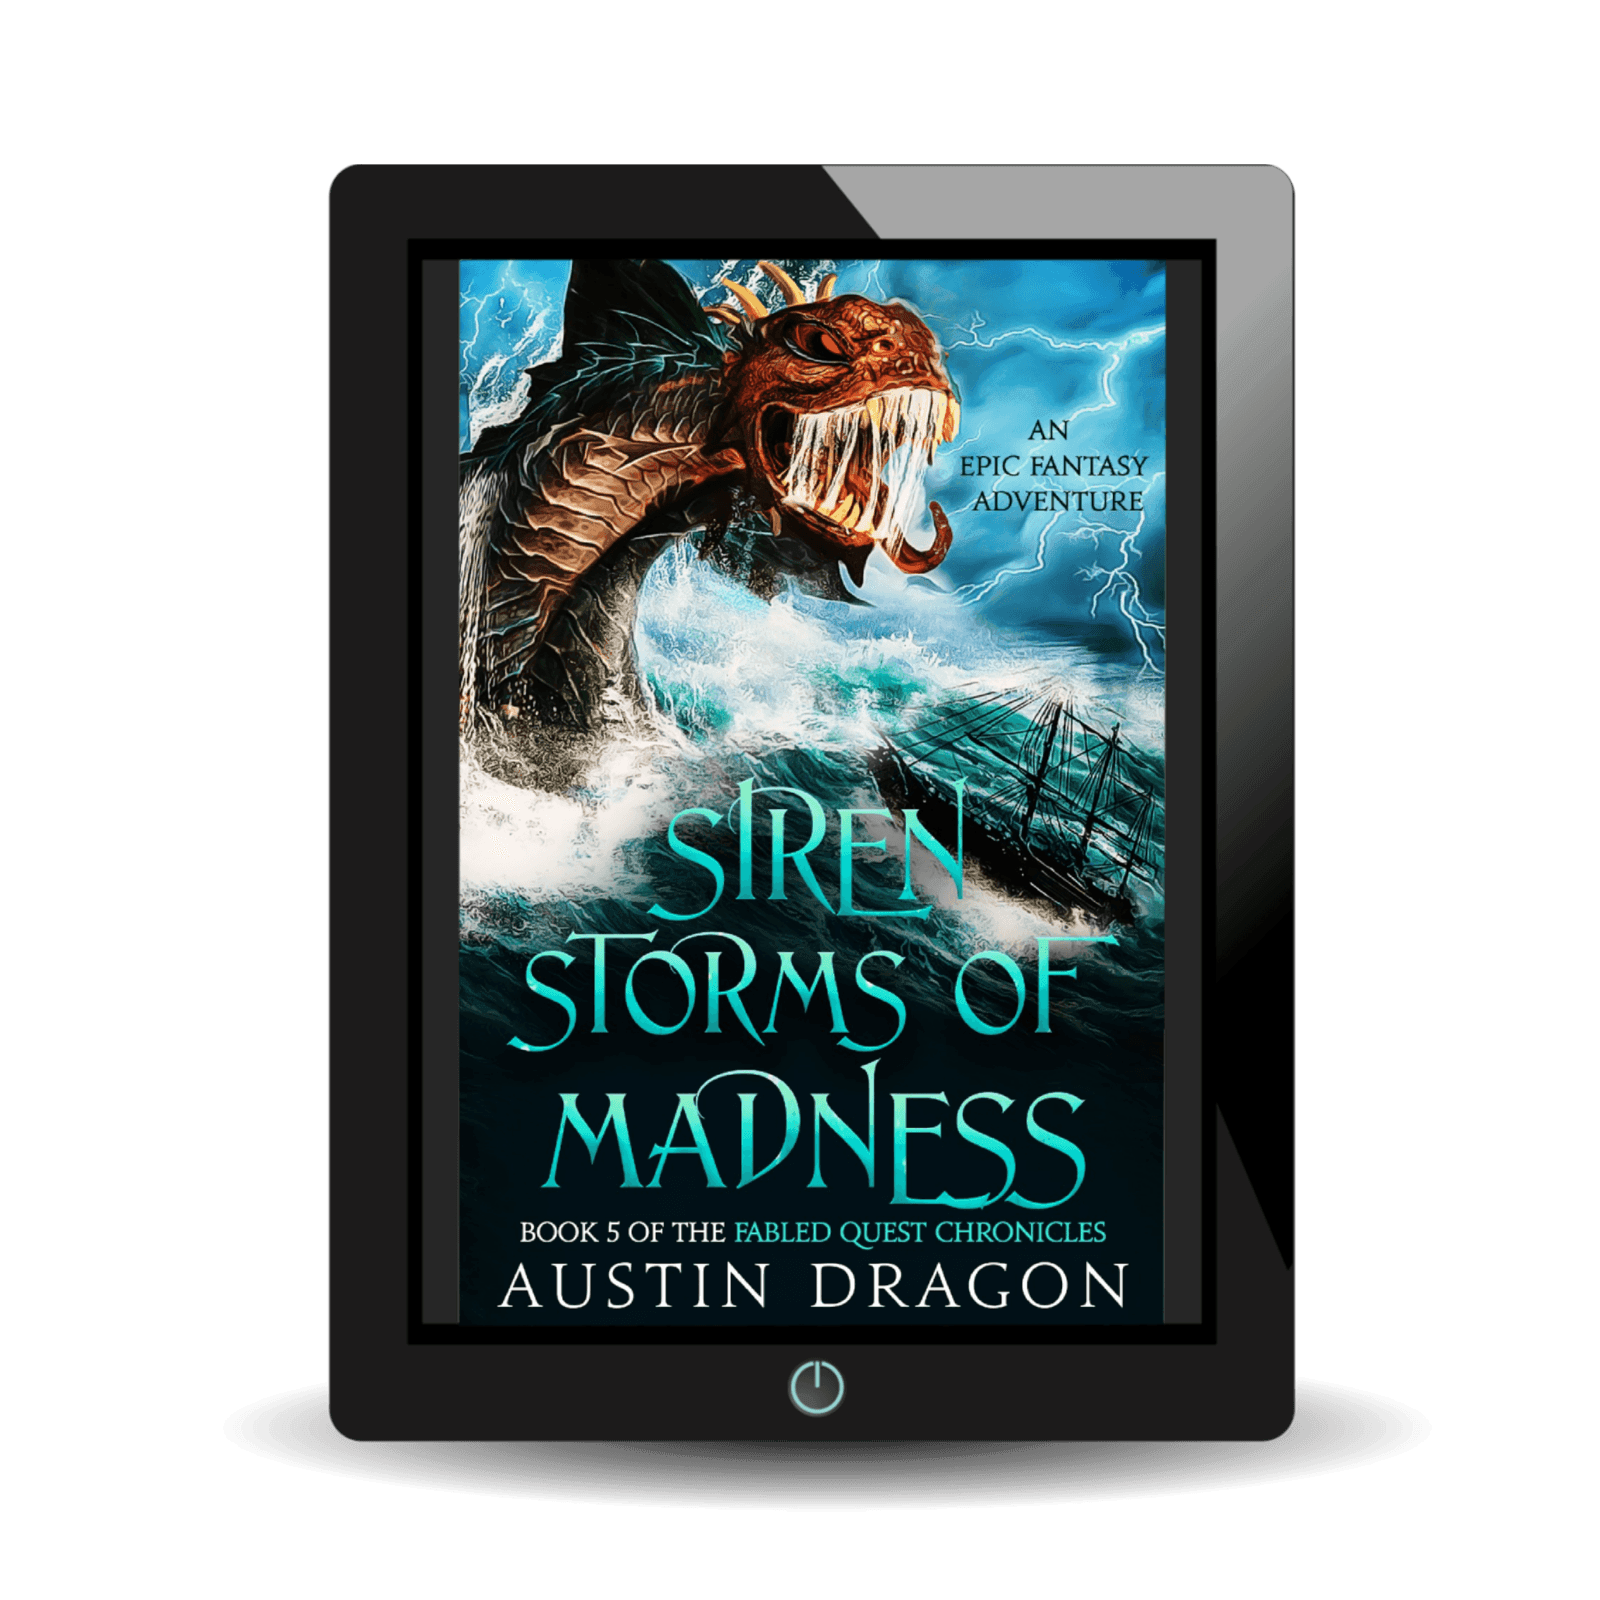 Siren Storms of Madness (Fabled Quest Chronicles, Book 5) Ebook